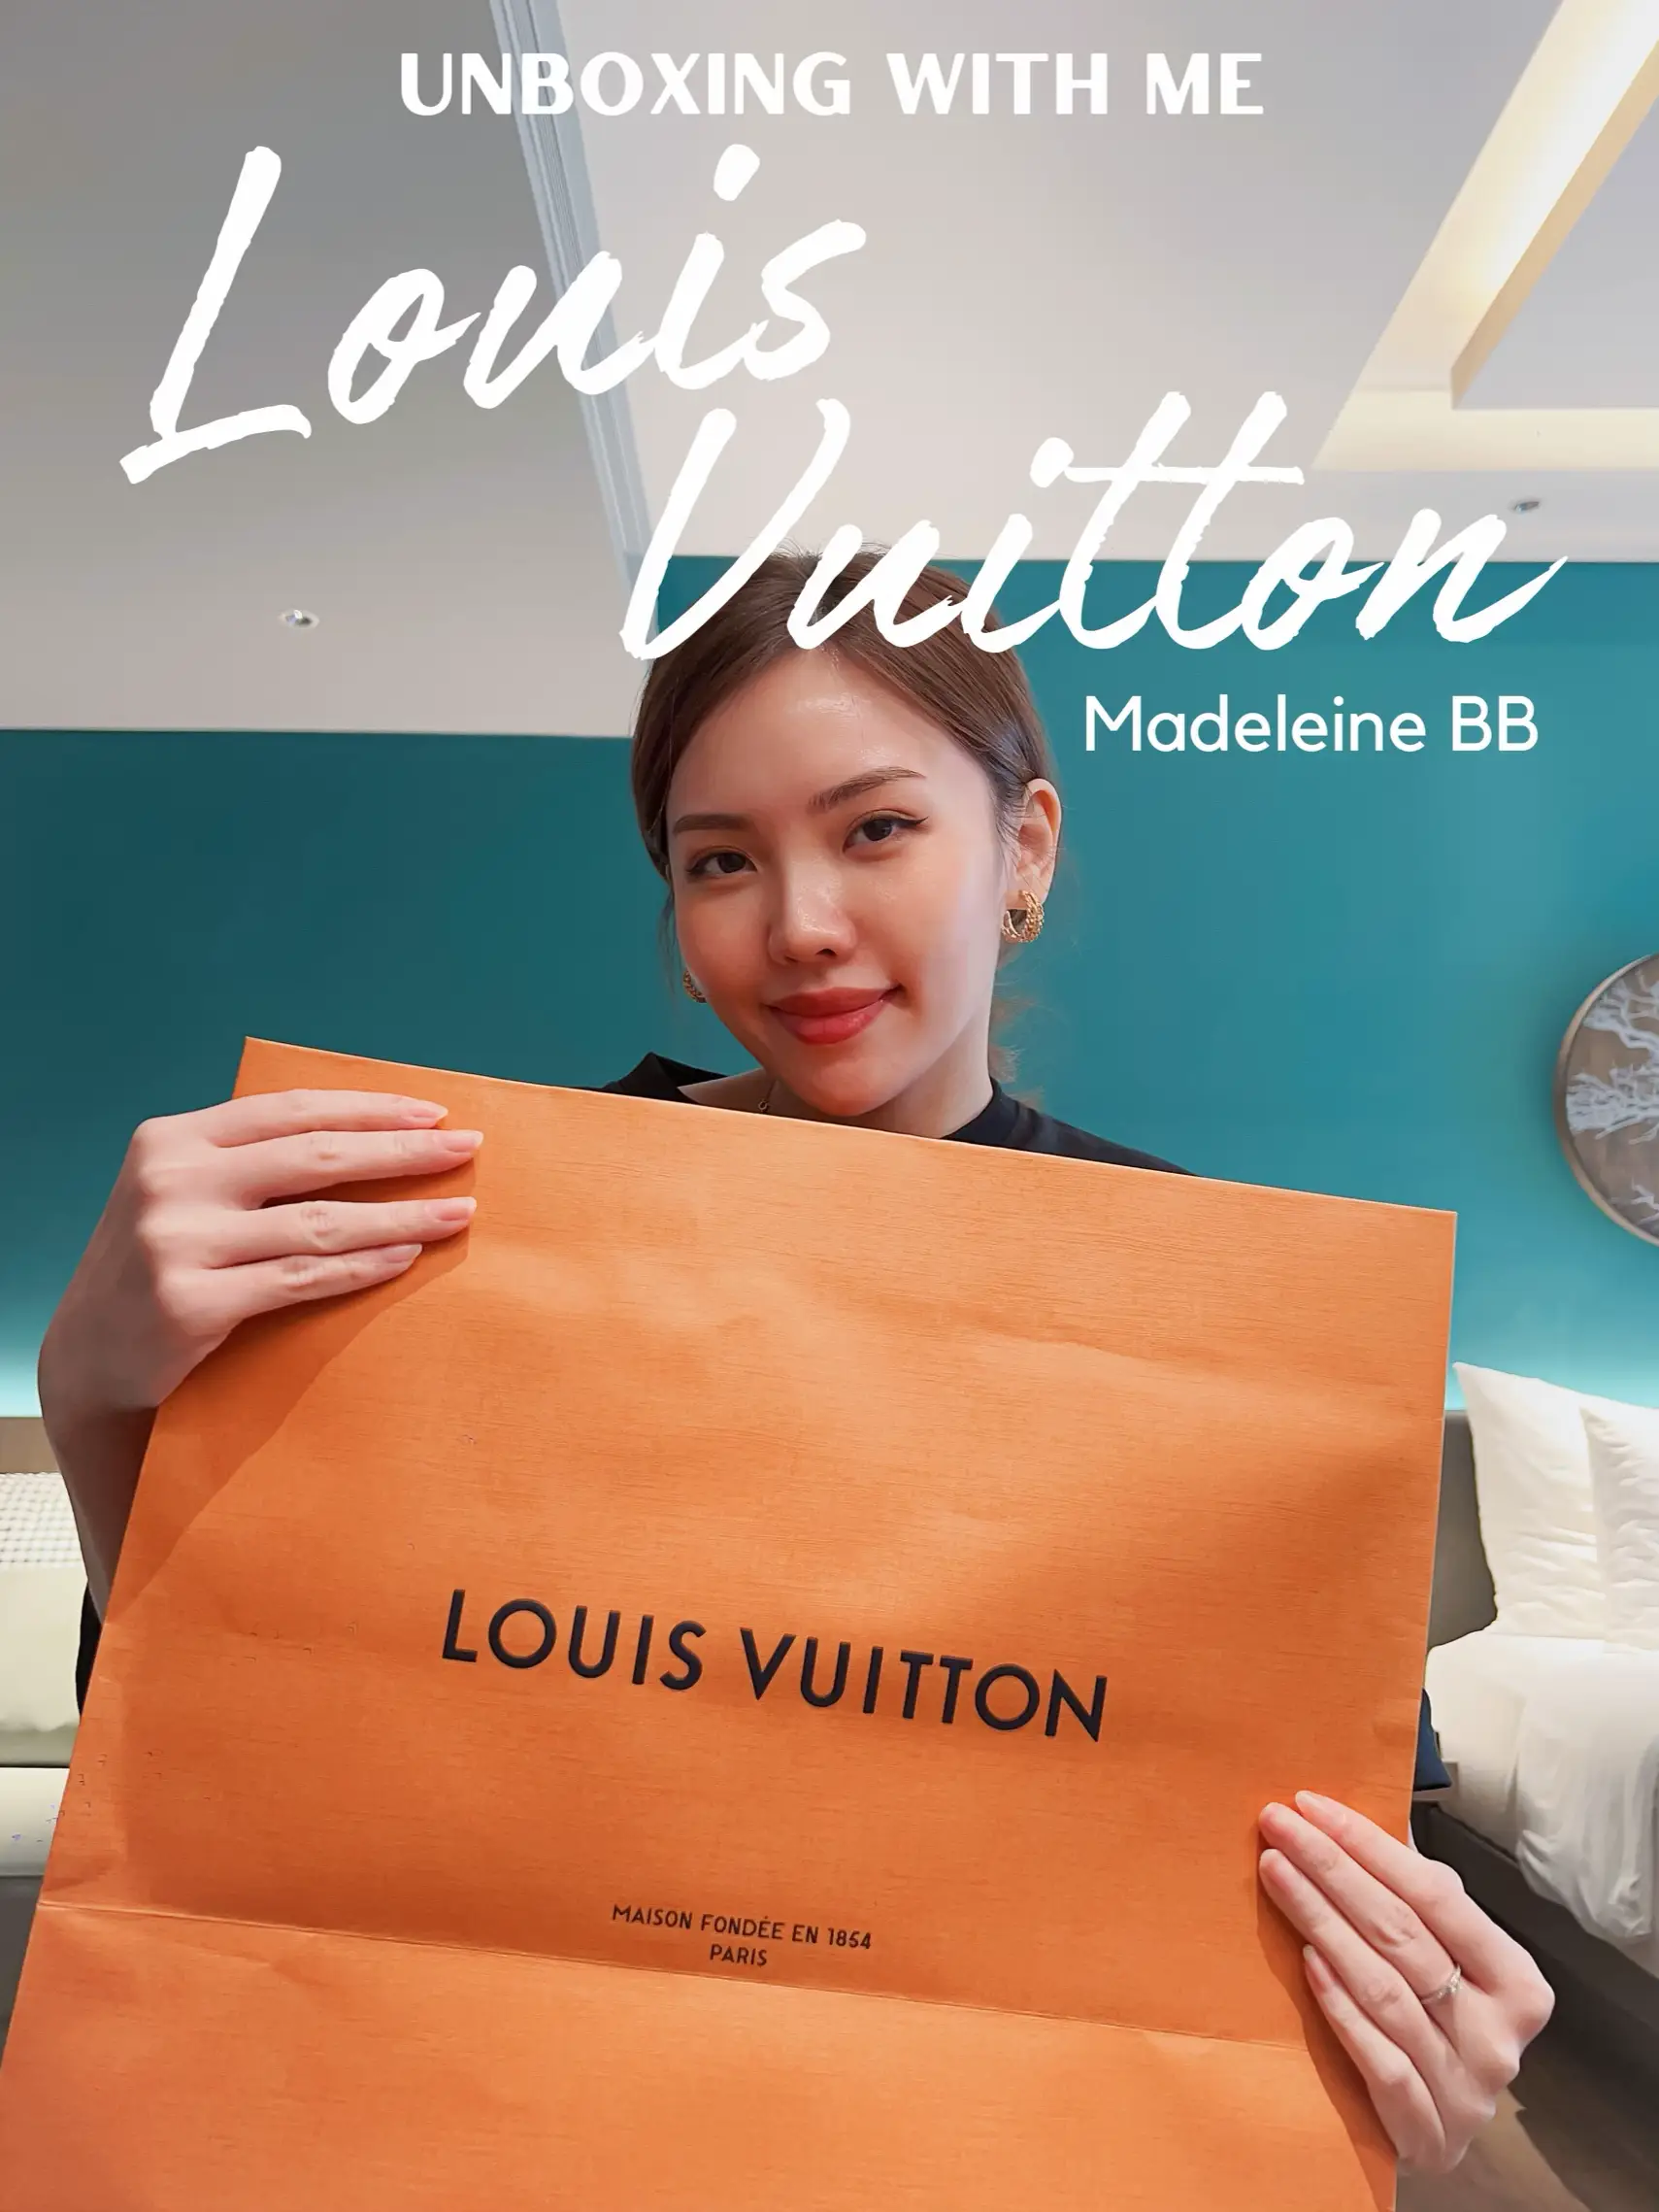 Unboxing LV Madeleine BB with Me! 😍, Video published by Jesslyn A S